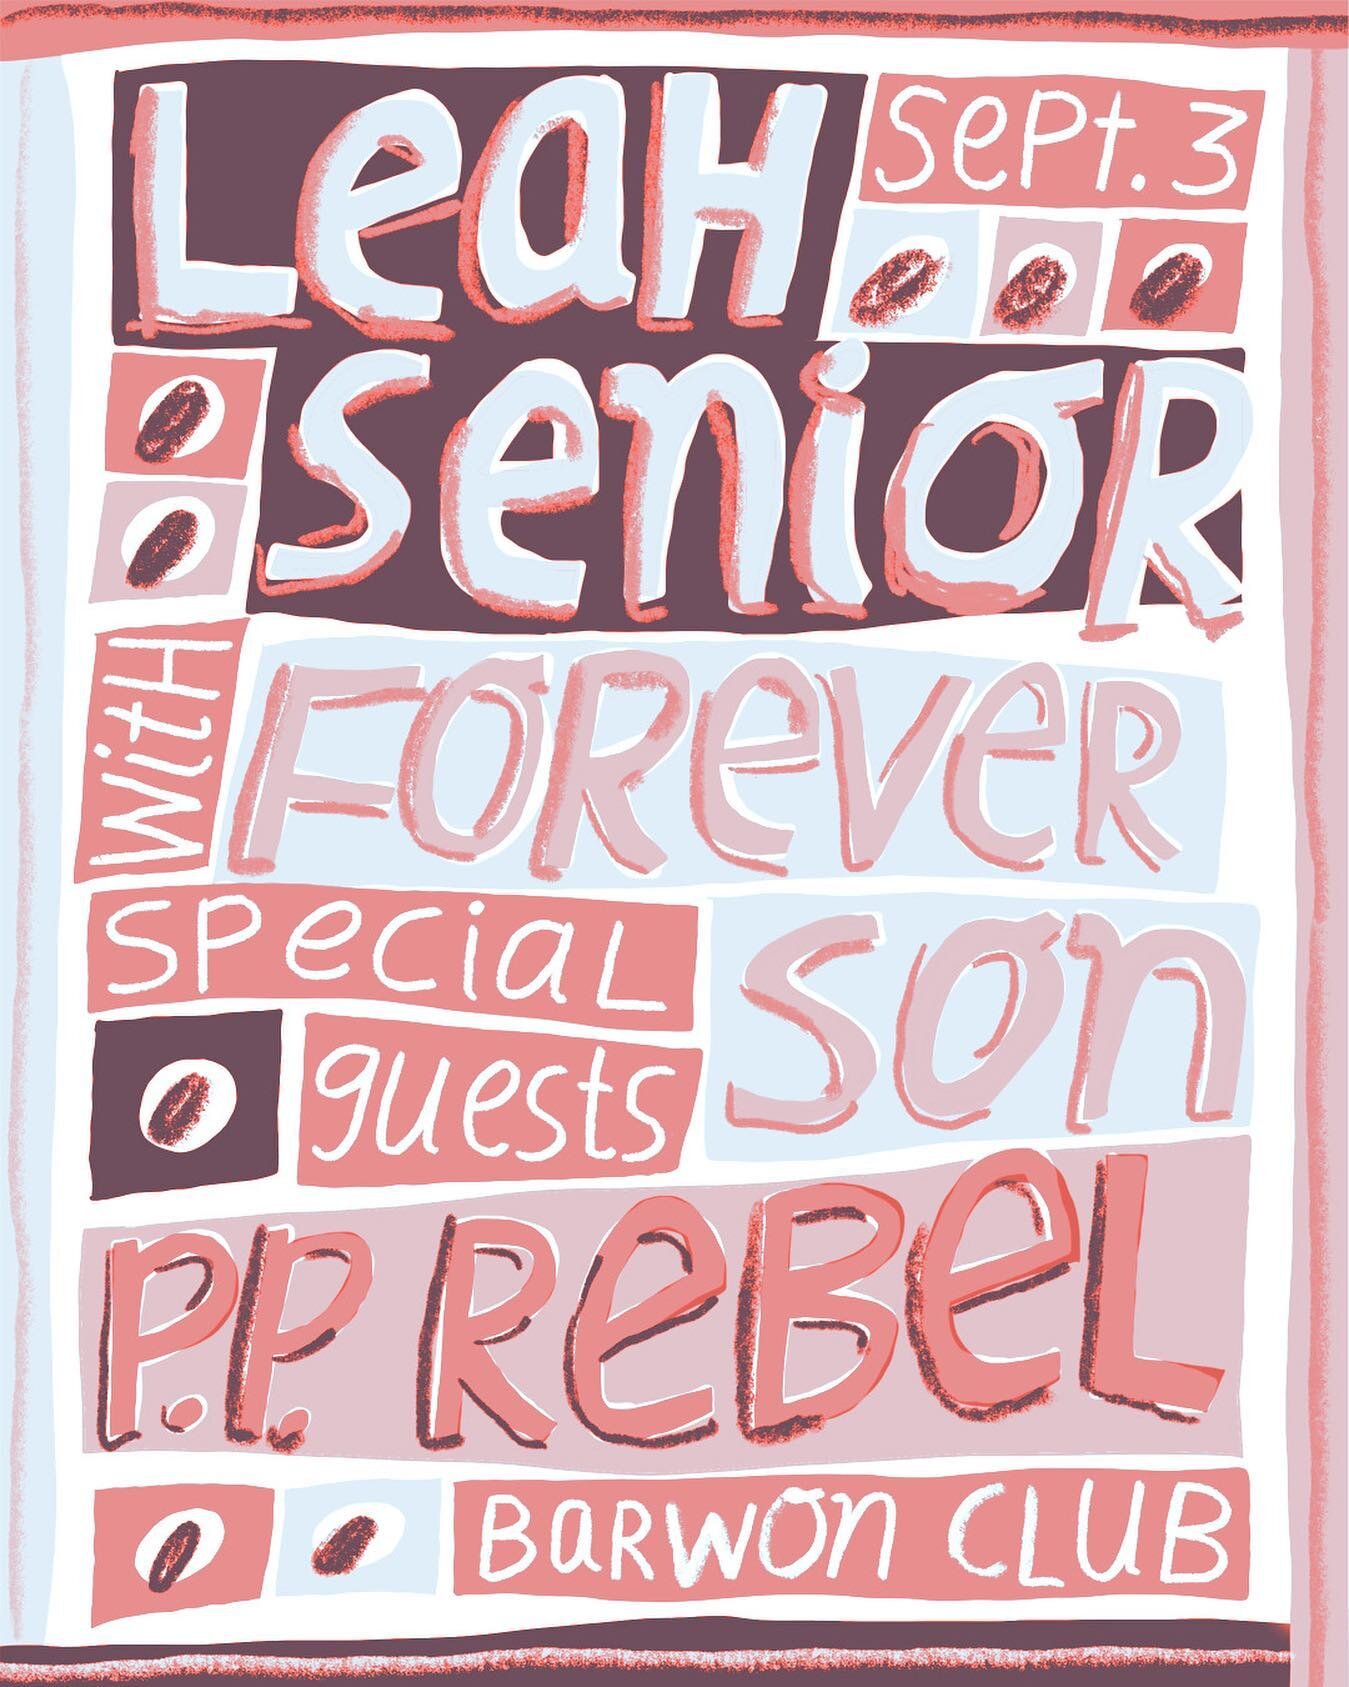 So excited for this show next Saturday supporting @leahseniormusic along with @pparis_rebel at @barwon_club !! Tickets via the link in the bio!

🖌 - @carolyn.helen